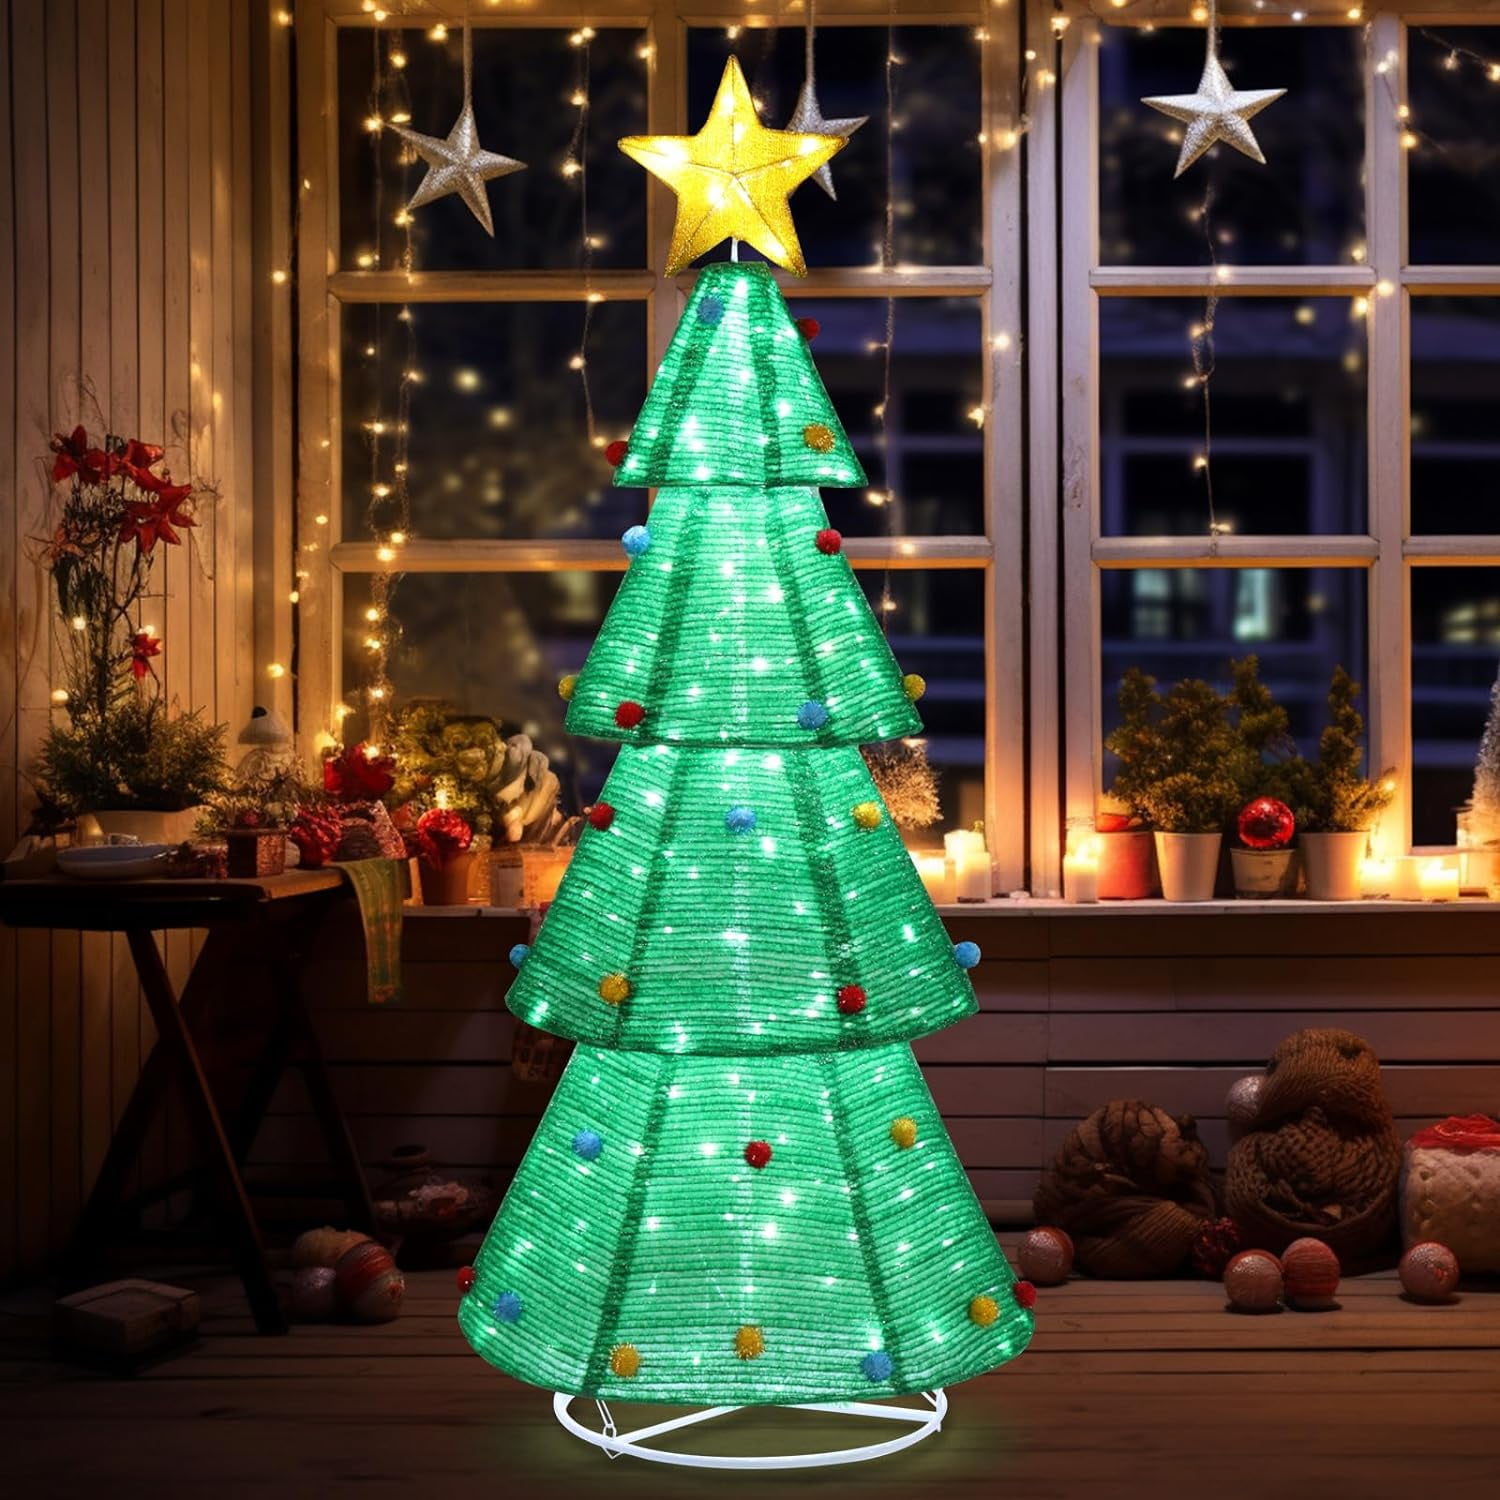 6FT Spruce Artificial Christmas Tree with Remote Timer 240 LEDs USB DIY LED  String Light Holiday Decor,Foldable Stand,48in Christmas Tree Bag